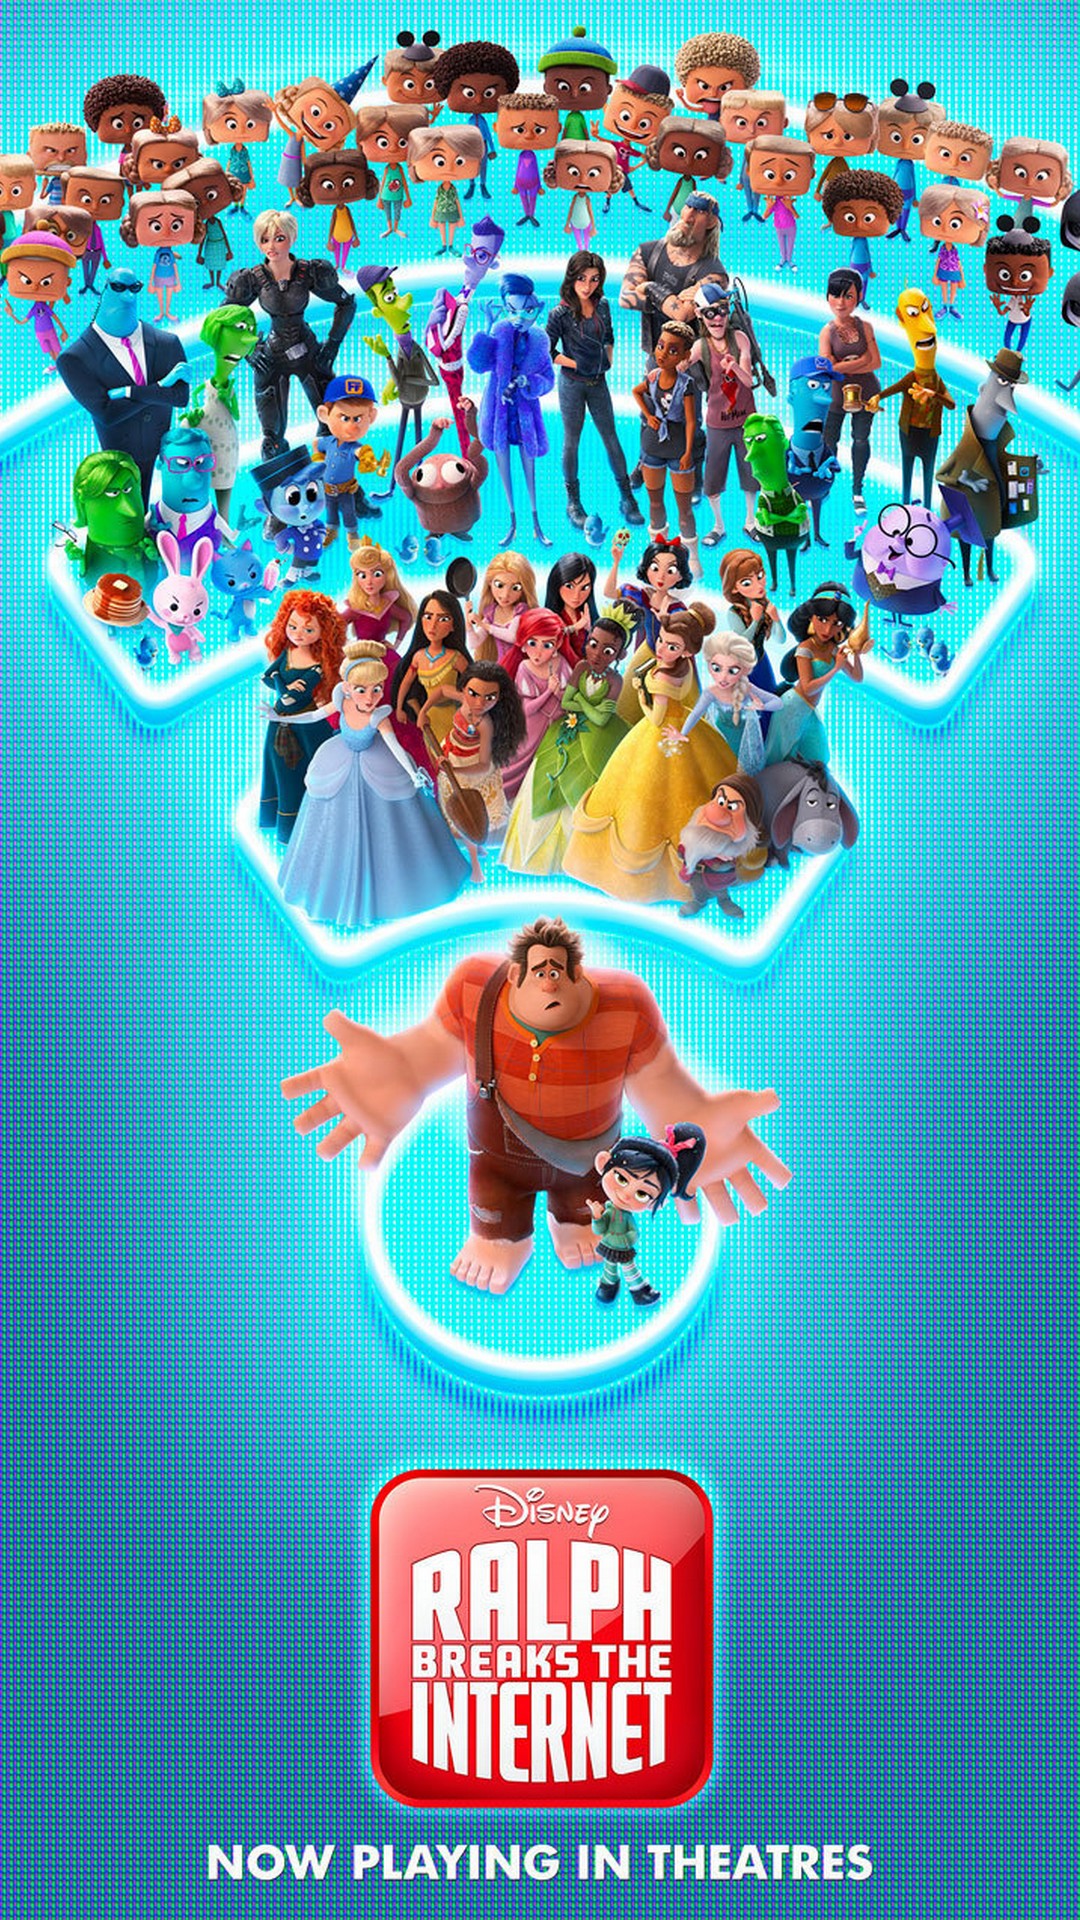 Wreck-It Ralph 2 2018 Movie Poster With Resolution 1080X1920 pixel. You can make this wallpaper for your Mac or Windows Desktop Background, iPhone, Android or Tablet and another Smartphone device for free